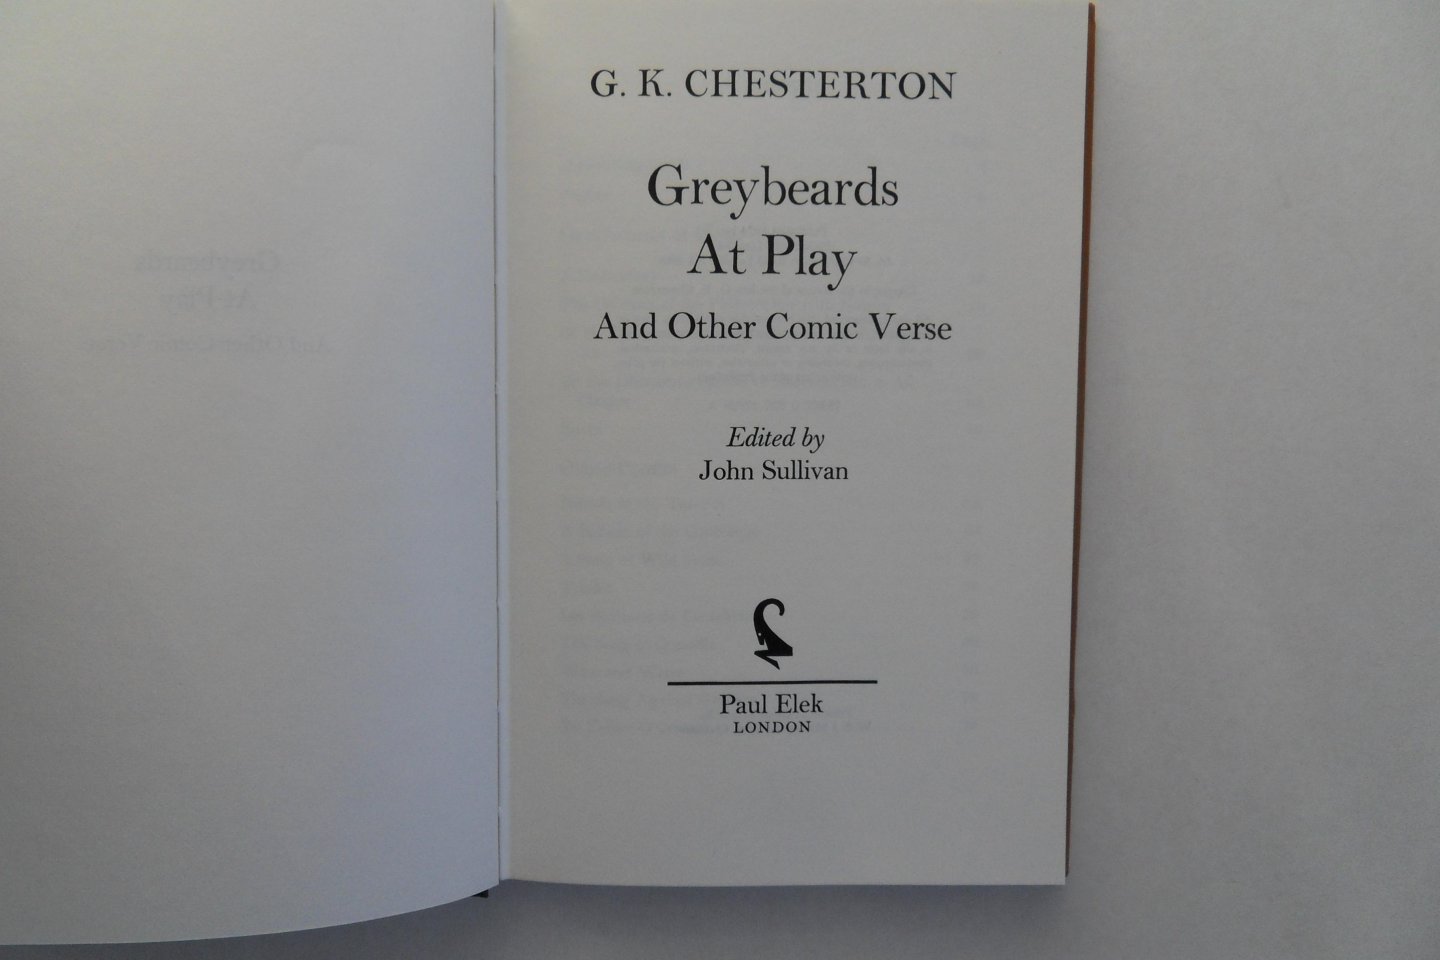 Chesterton, G.K. [ edited by John Sullivan ]. - Greybeards at Play and other Comic Verse.